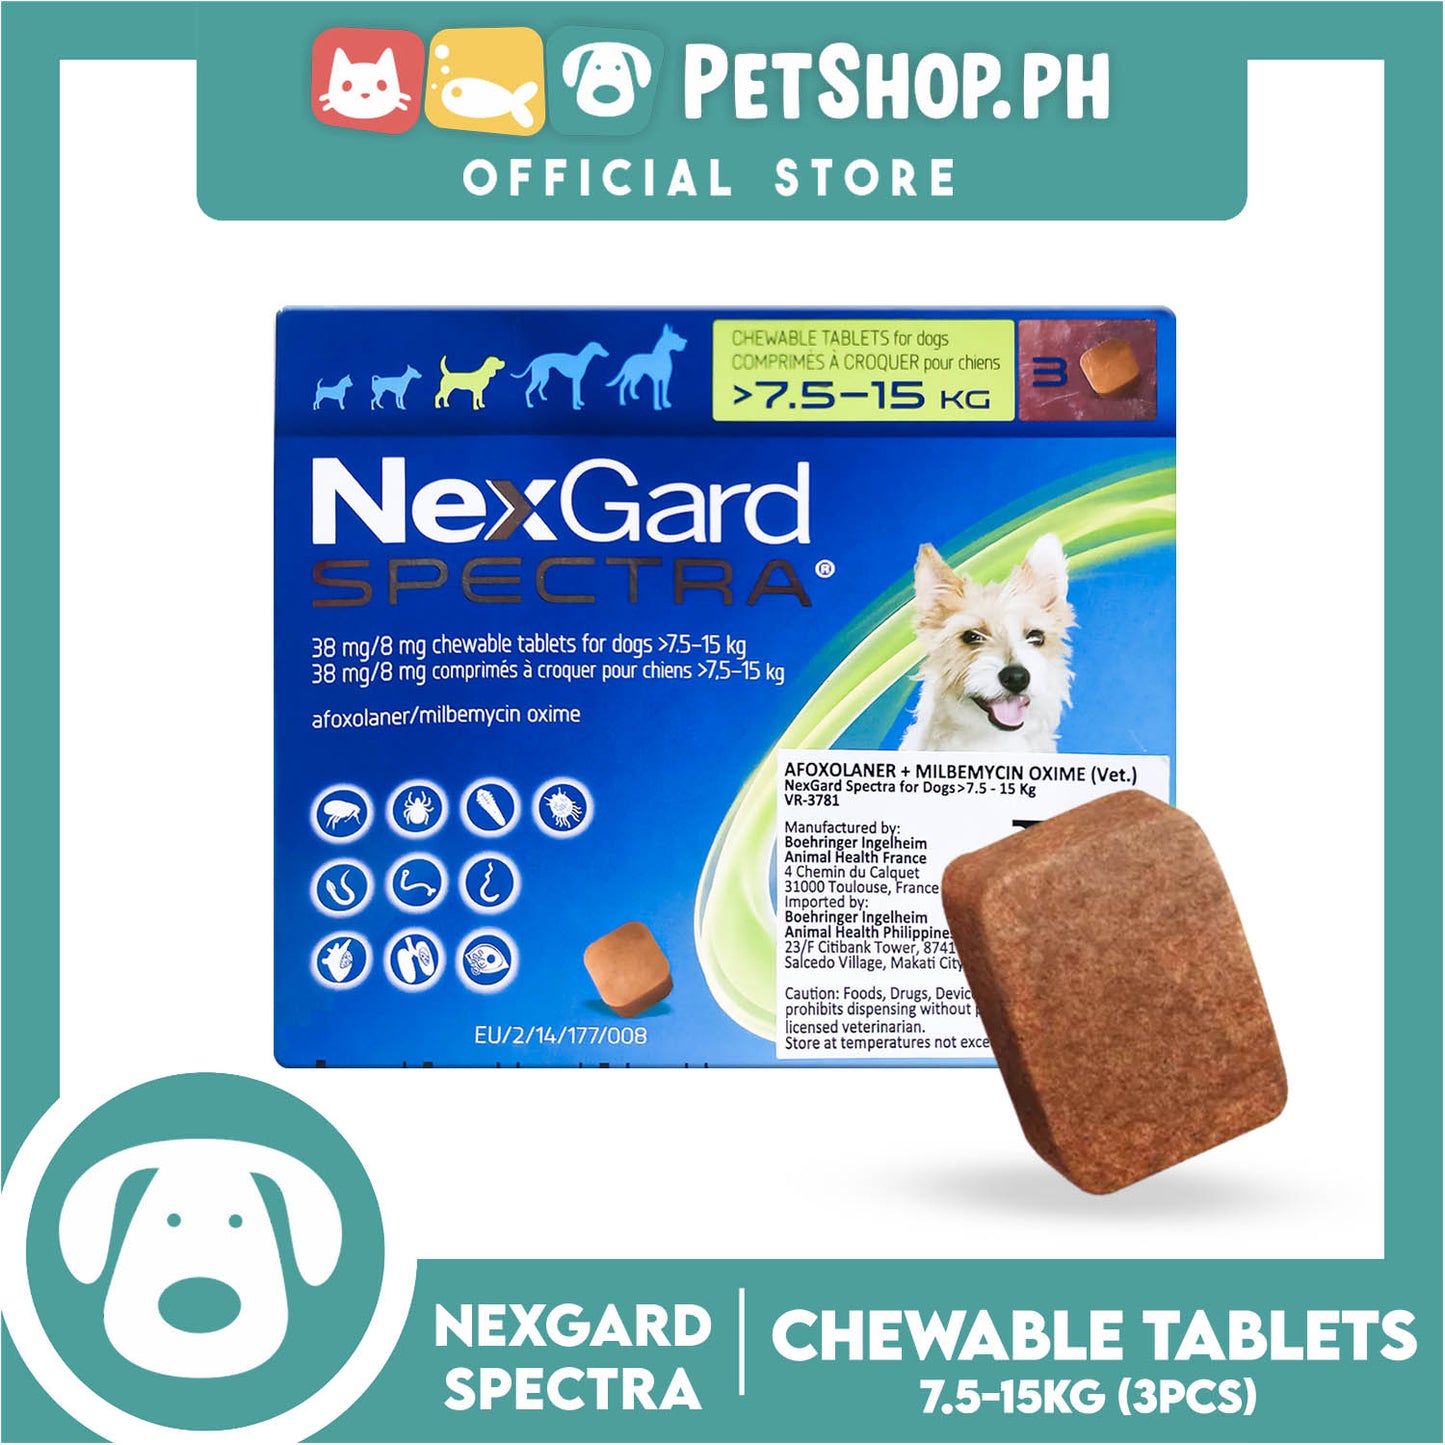 NexGard Spectra Chewable Tablets For Dogs Medium 7.5-15kg 38mg/ 8mg (3 –